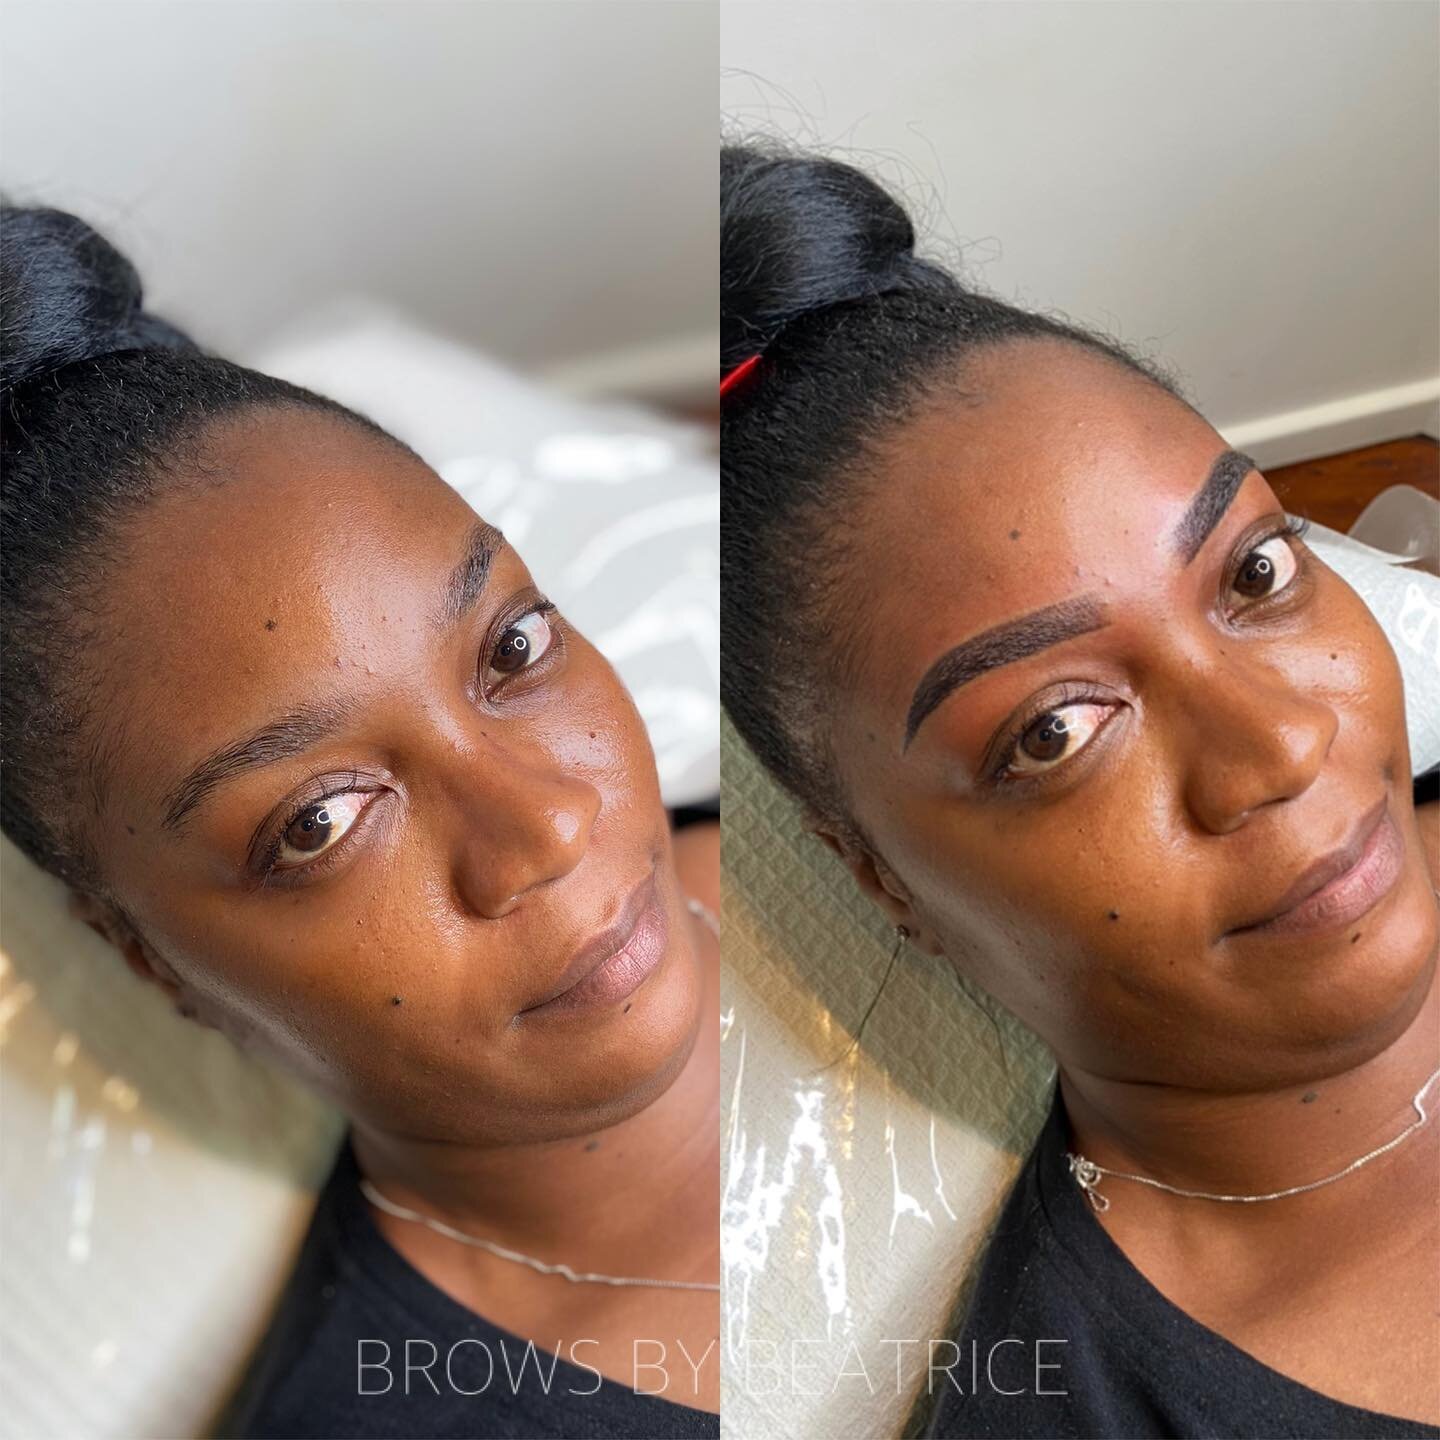 I think the smile says it all 😇😇 OMBR&Eacute; BROWS 😍

These will soften and fade slightly once fully healed. The fresh brow tattoo is always intense! Looks so clean + crisp 🤩

Book online at
WWW.BROWSBYBEATRICE.COM